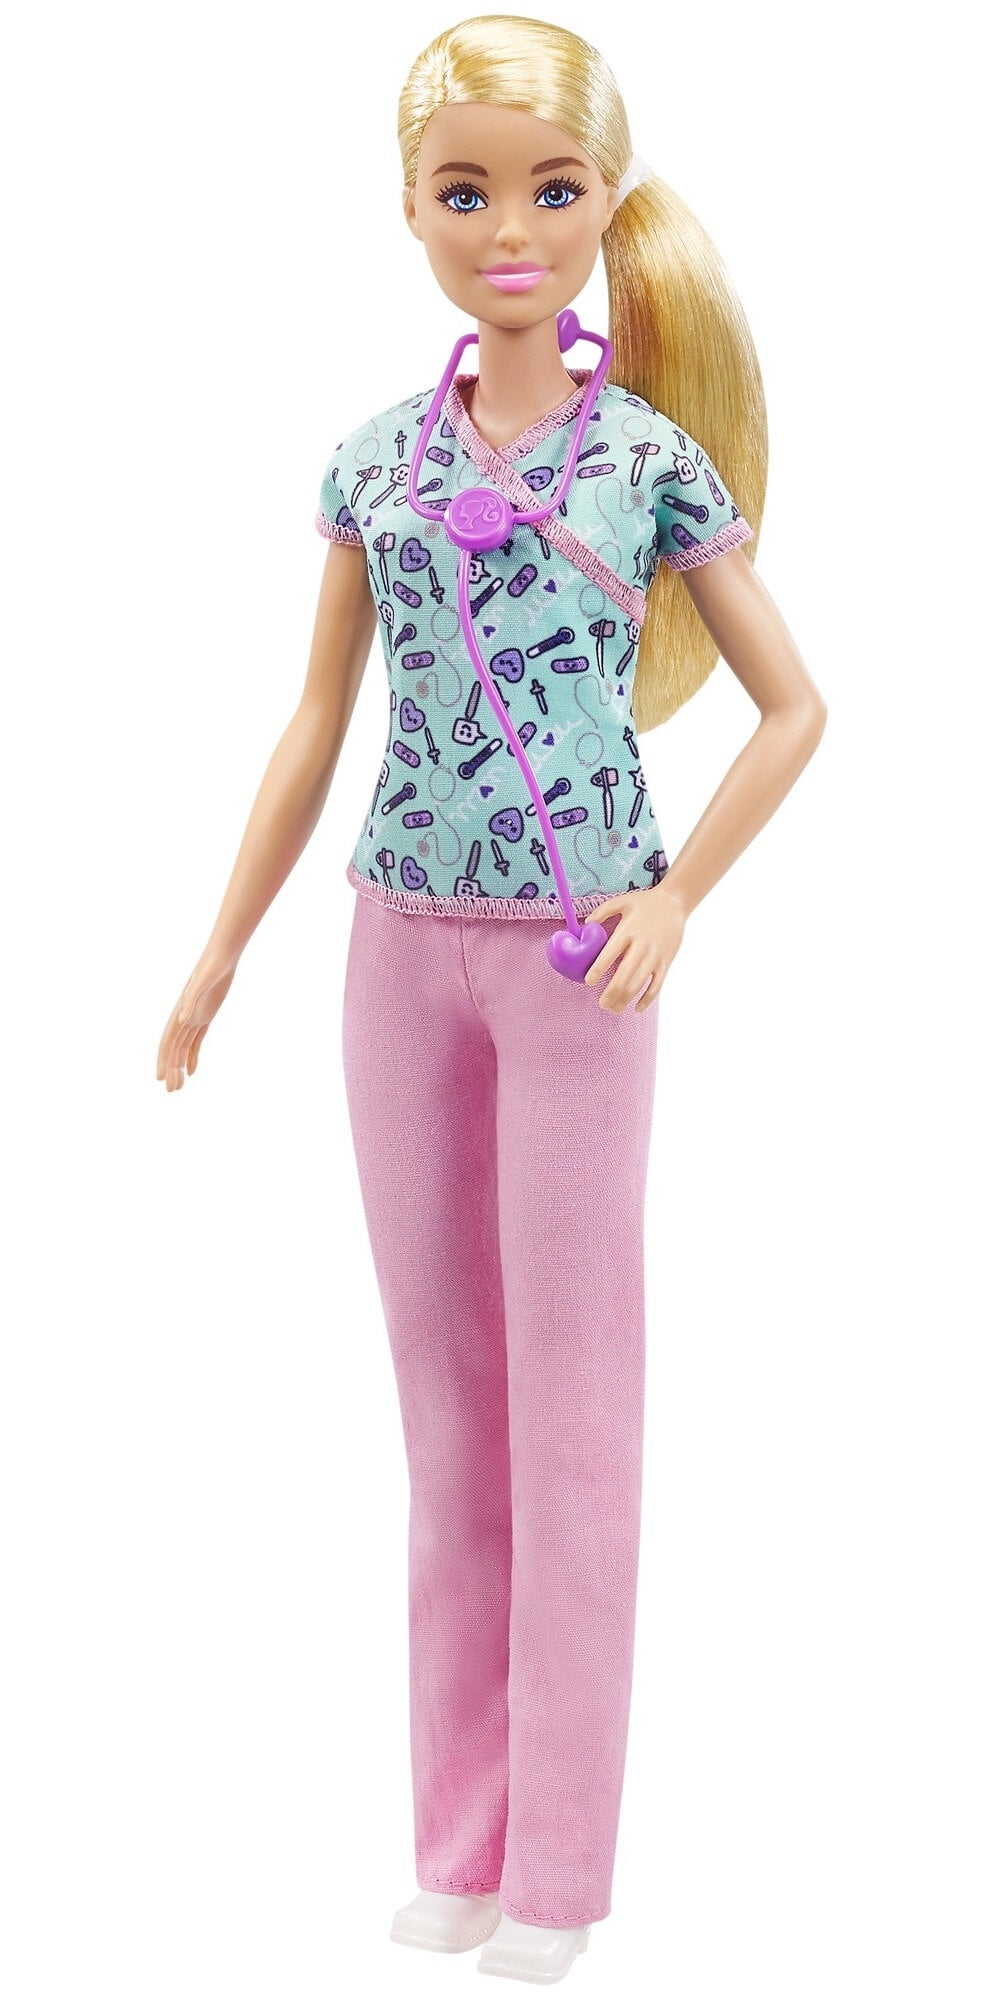 Barbie Career Nurse Doll, Blonde with Scrubs Featuring a Medical Tool Print Top and Pink Pants, White Shoes and Stethoscope Accessory